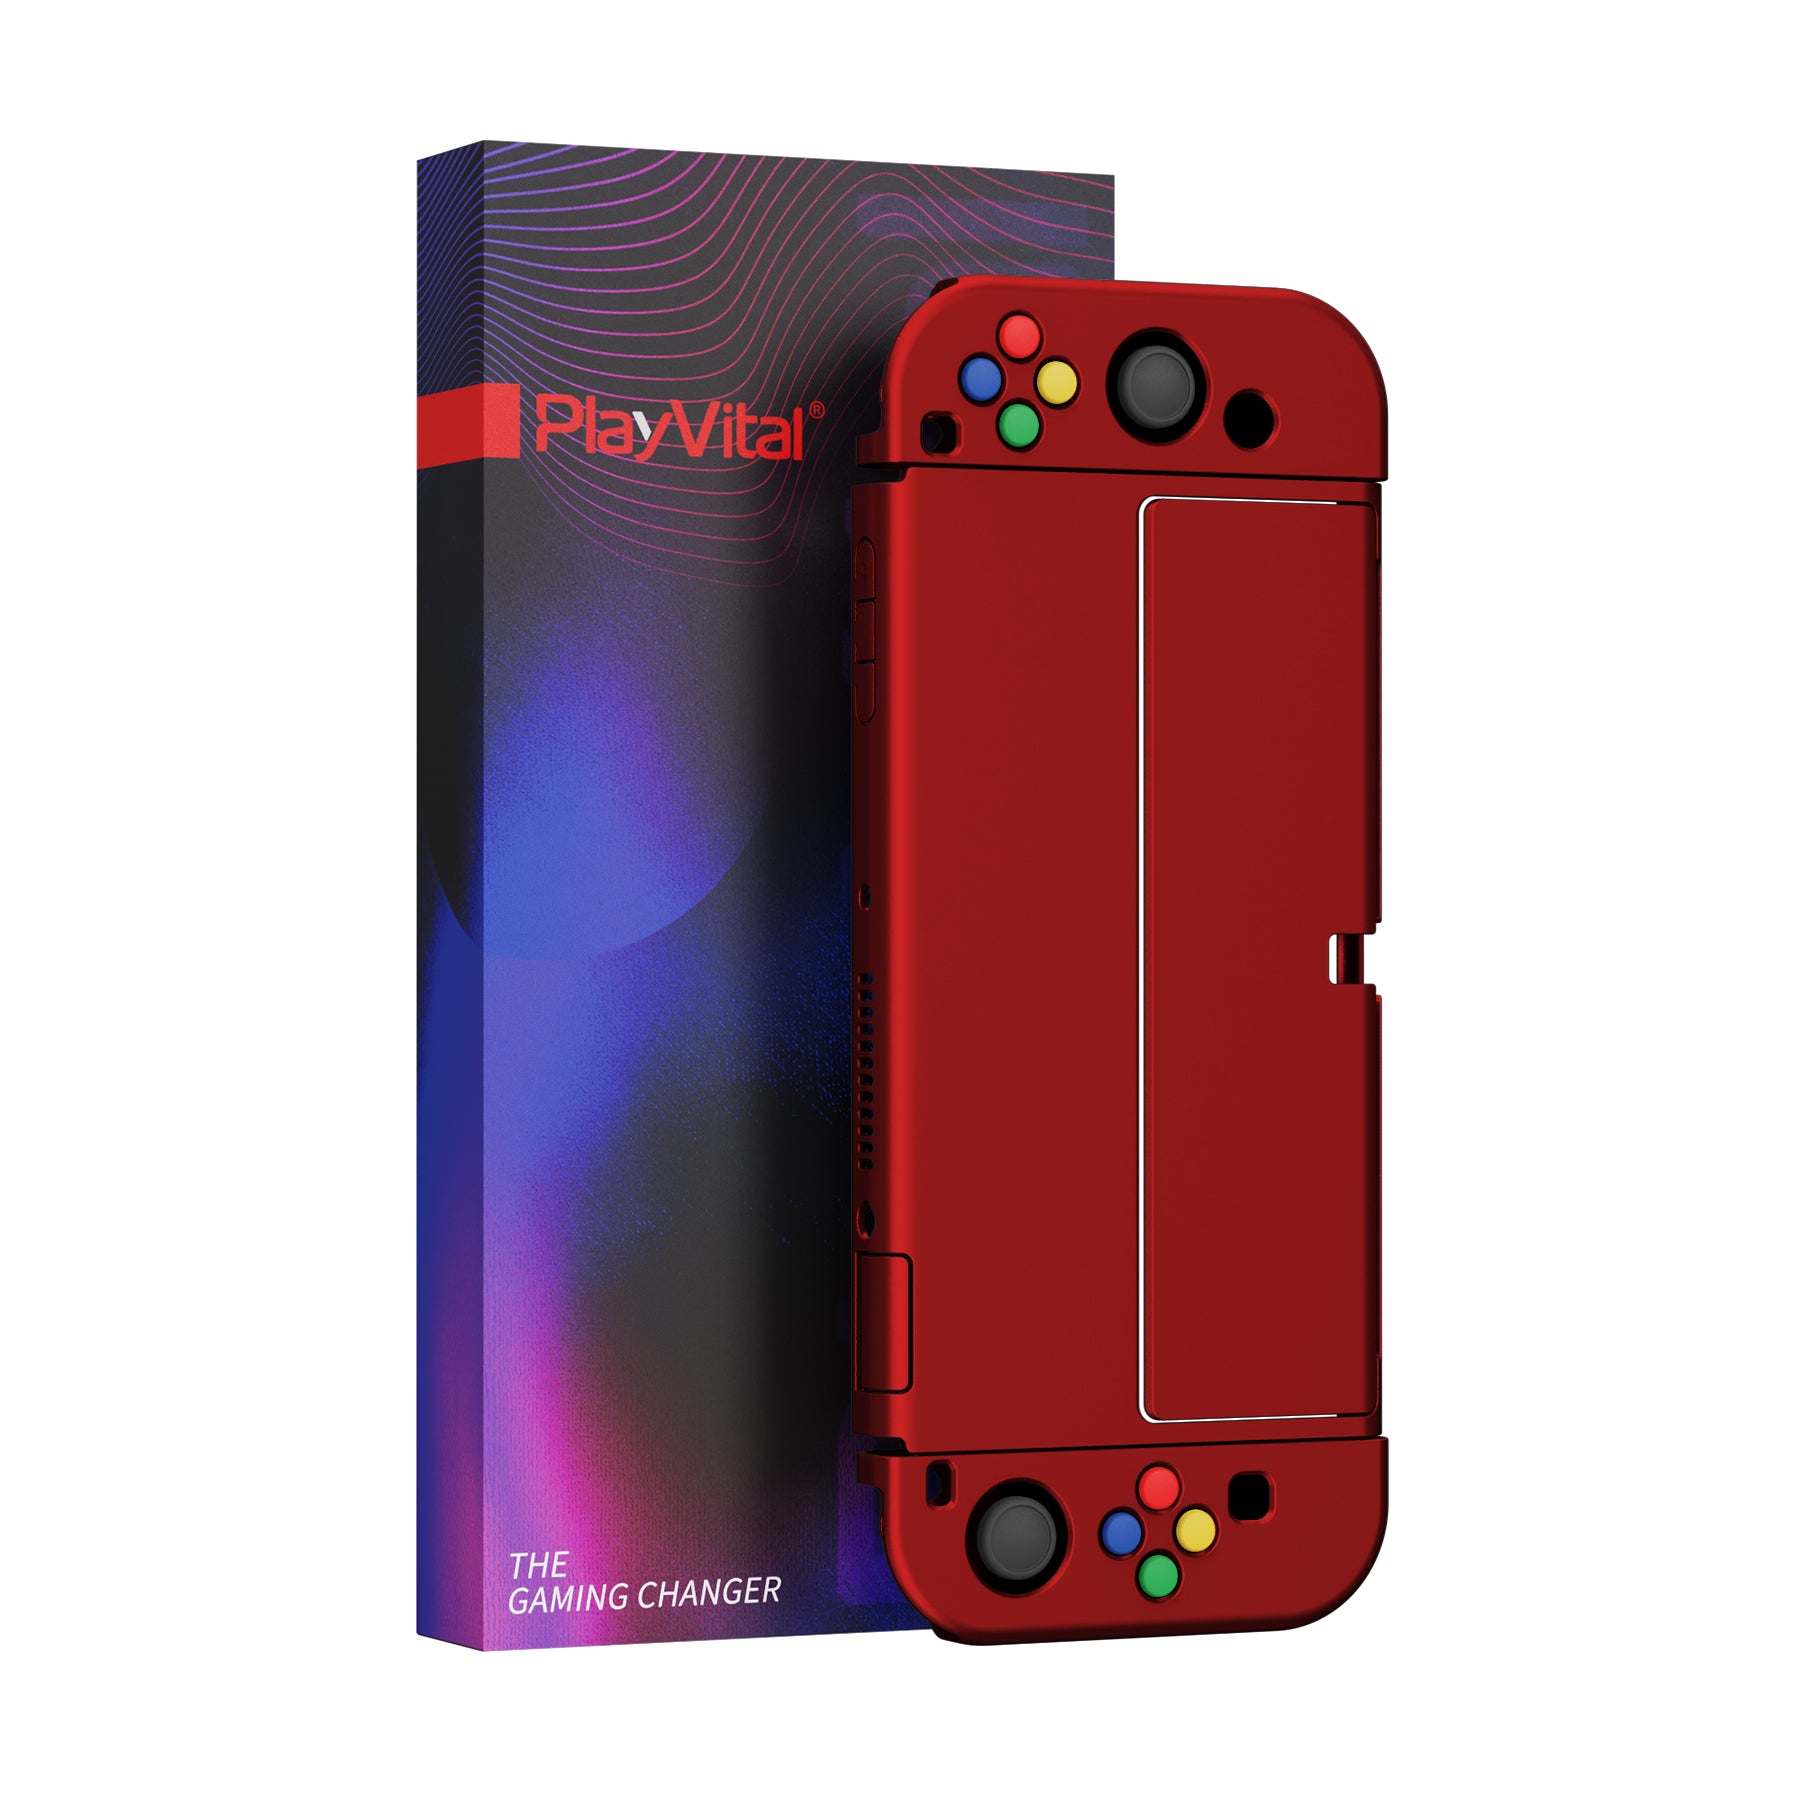 PlayVital AlterGrips Protective Slim Case for Nintendo Switch OLED, Ergonomic Grip Cover for Joycon, Dockable Hard Shell for Switch OLED with Thumb Grip Caps & Button Caps - Scarlet Red - JSOYP3004 playvital